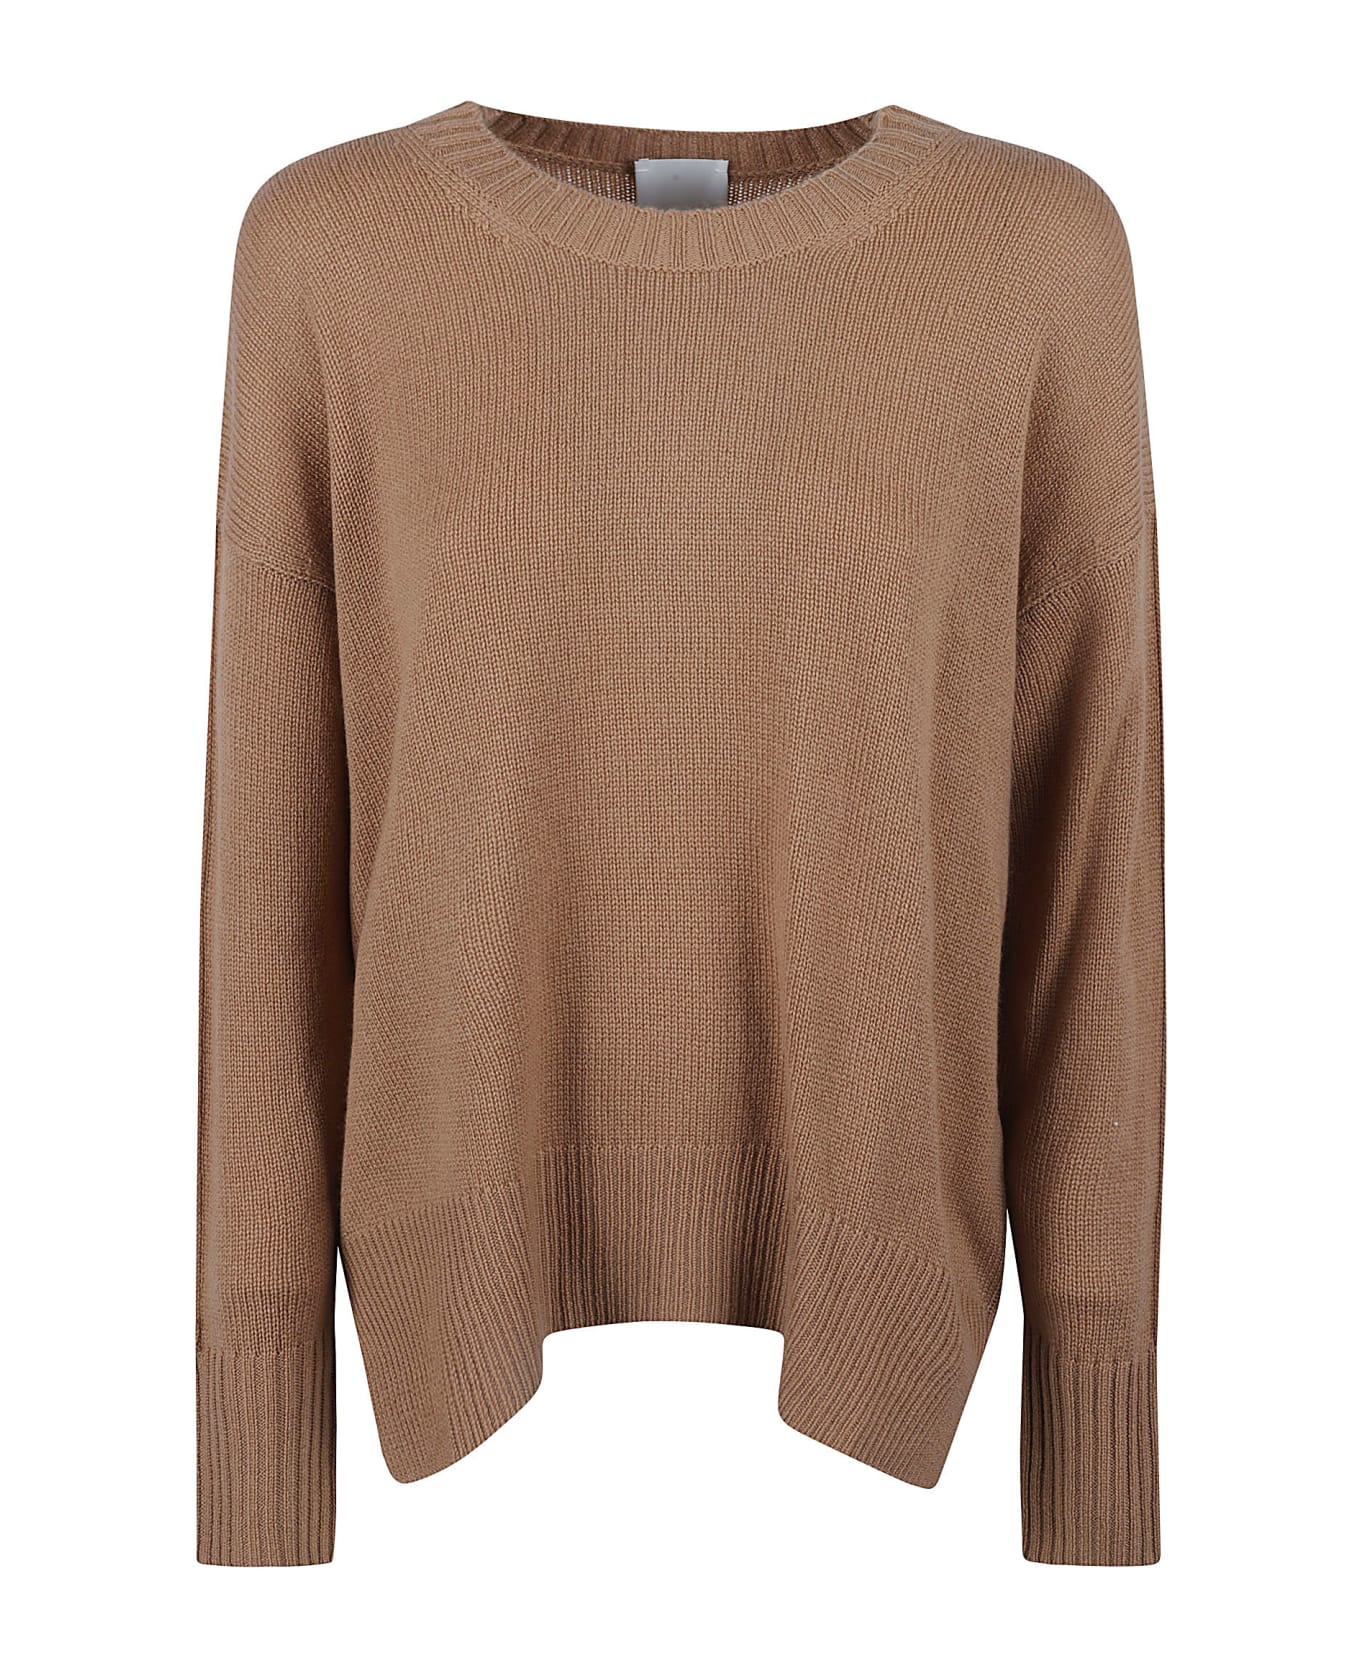 Allude Loose Fit Side Slit Knit Sweater - BROWN